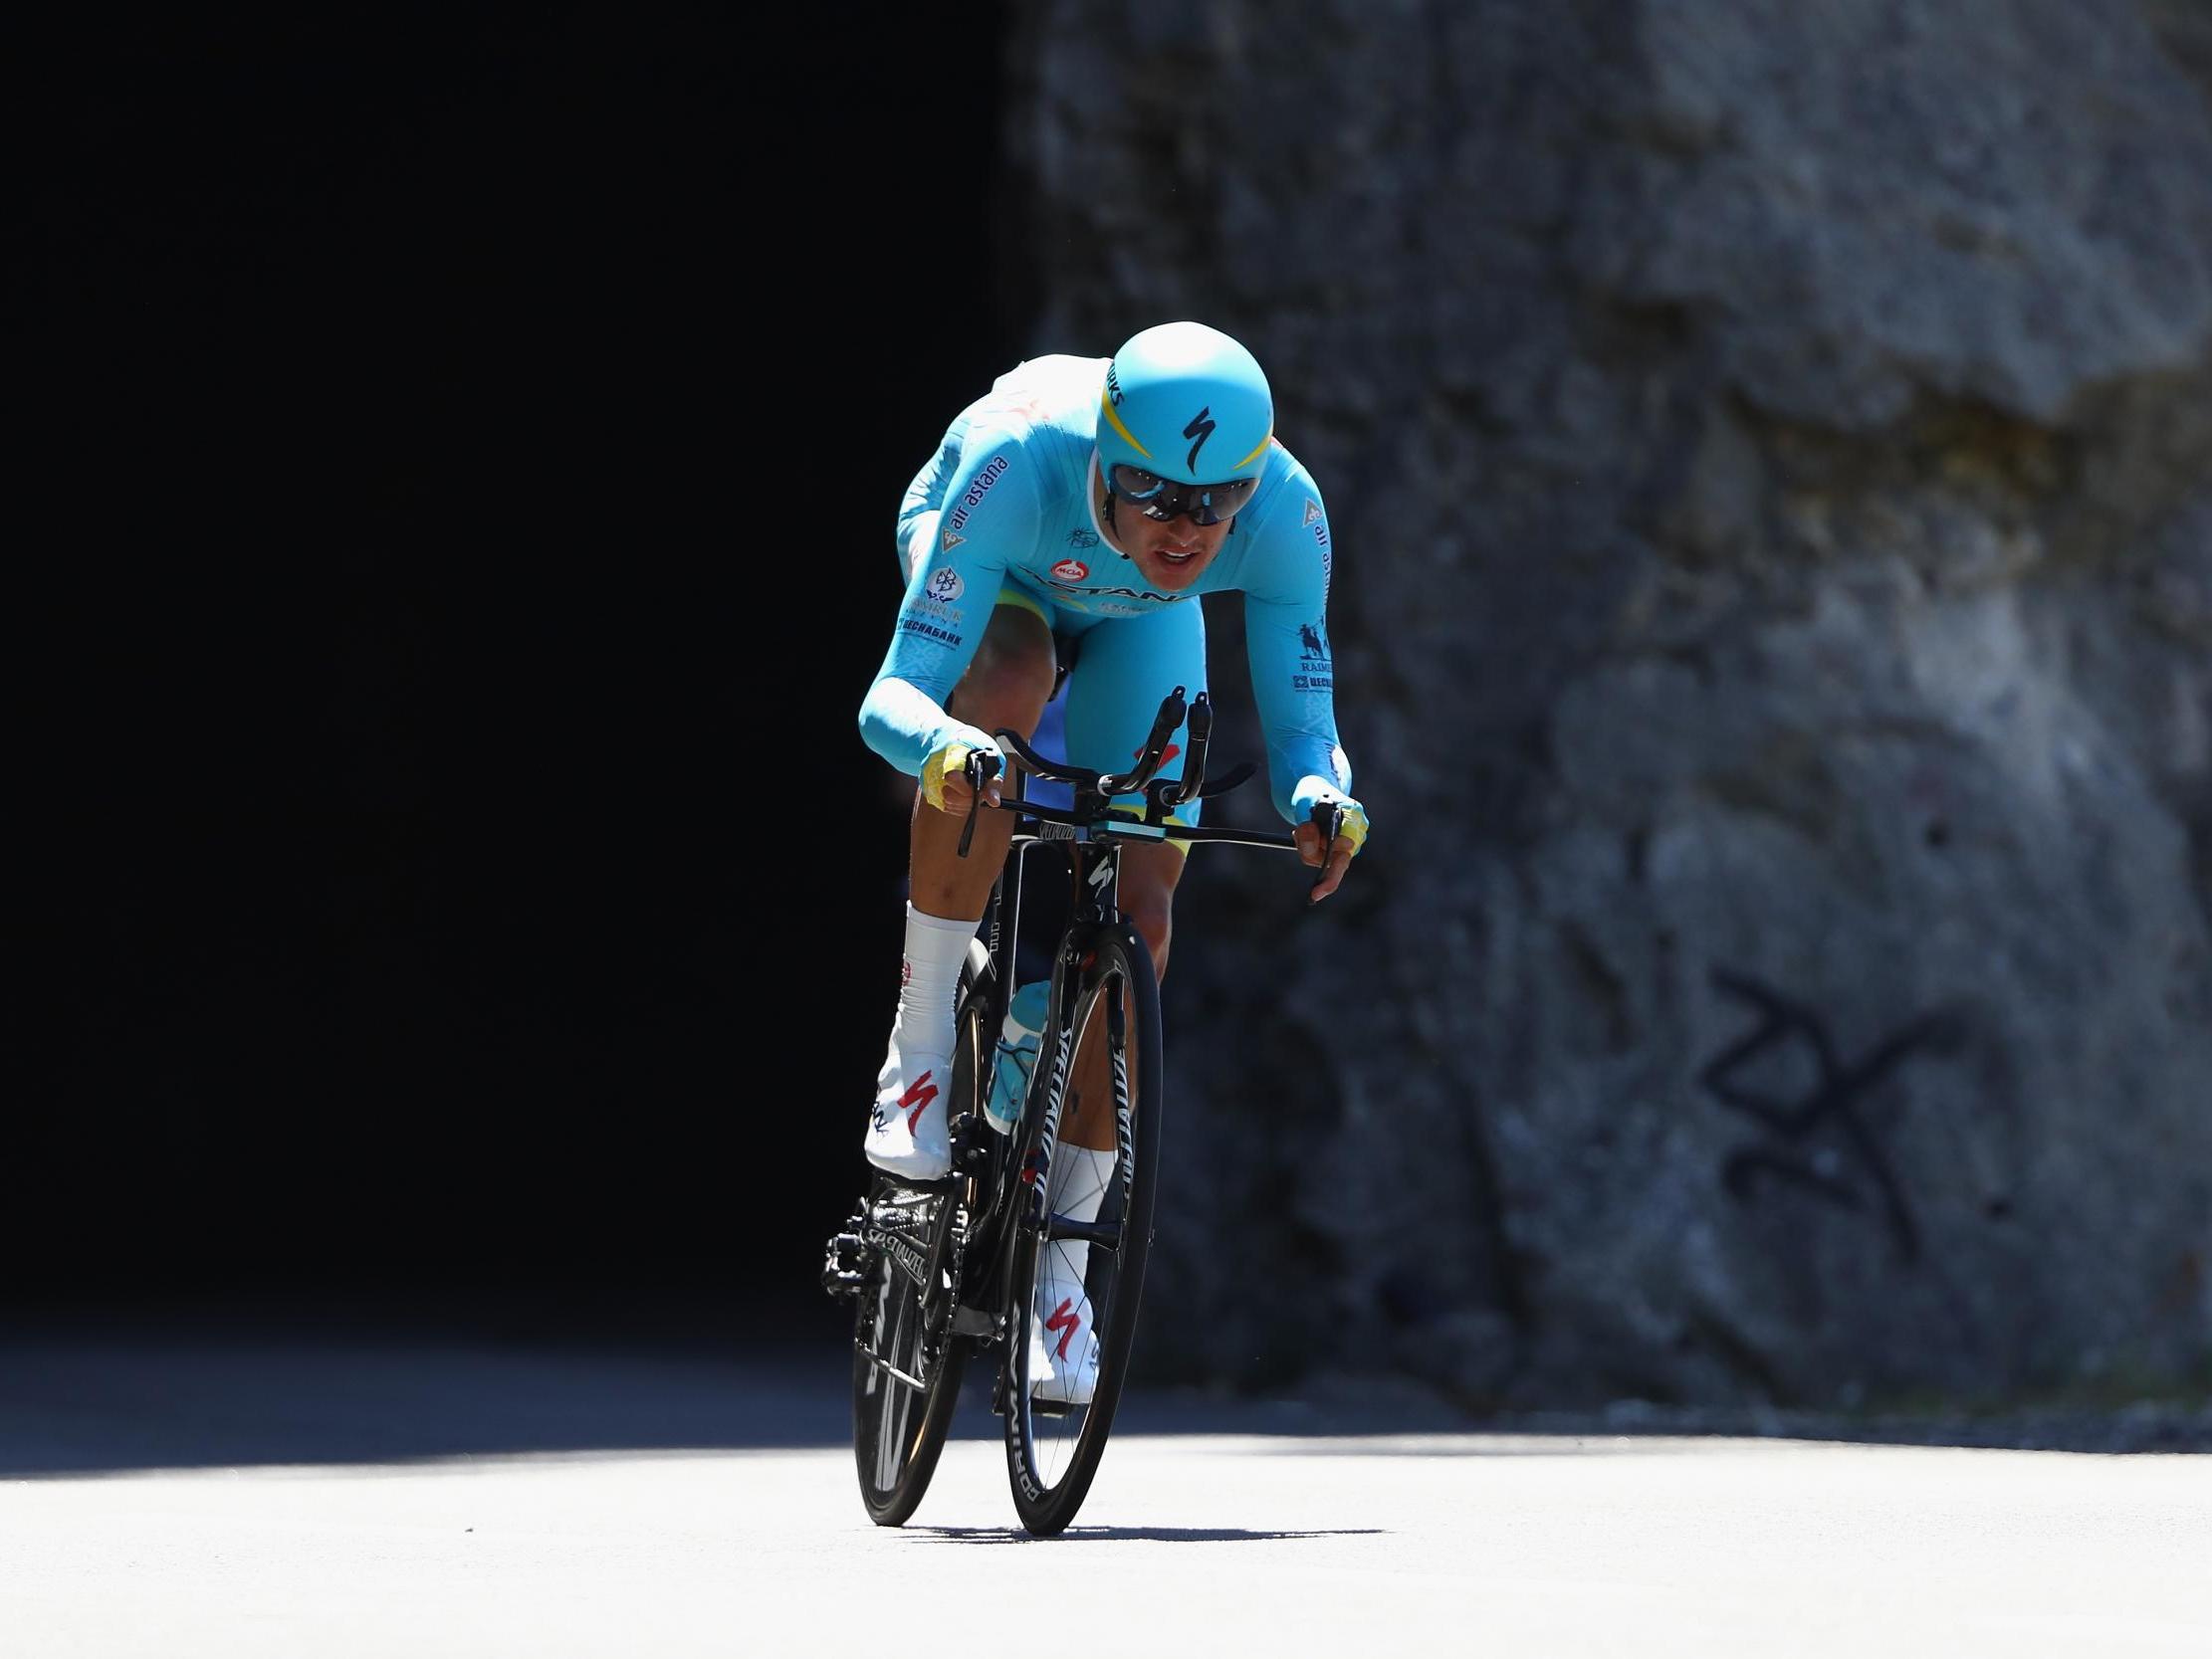 Fuglsang was one of the leading riders in 2019